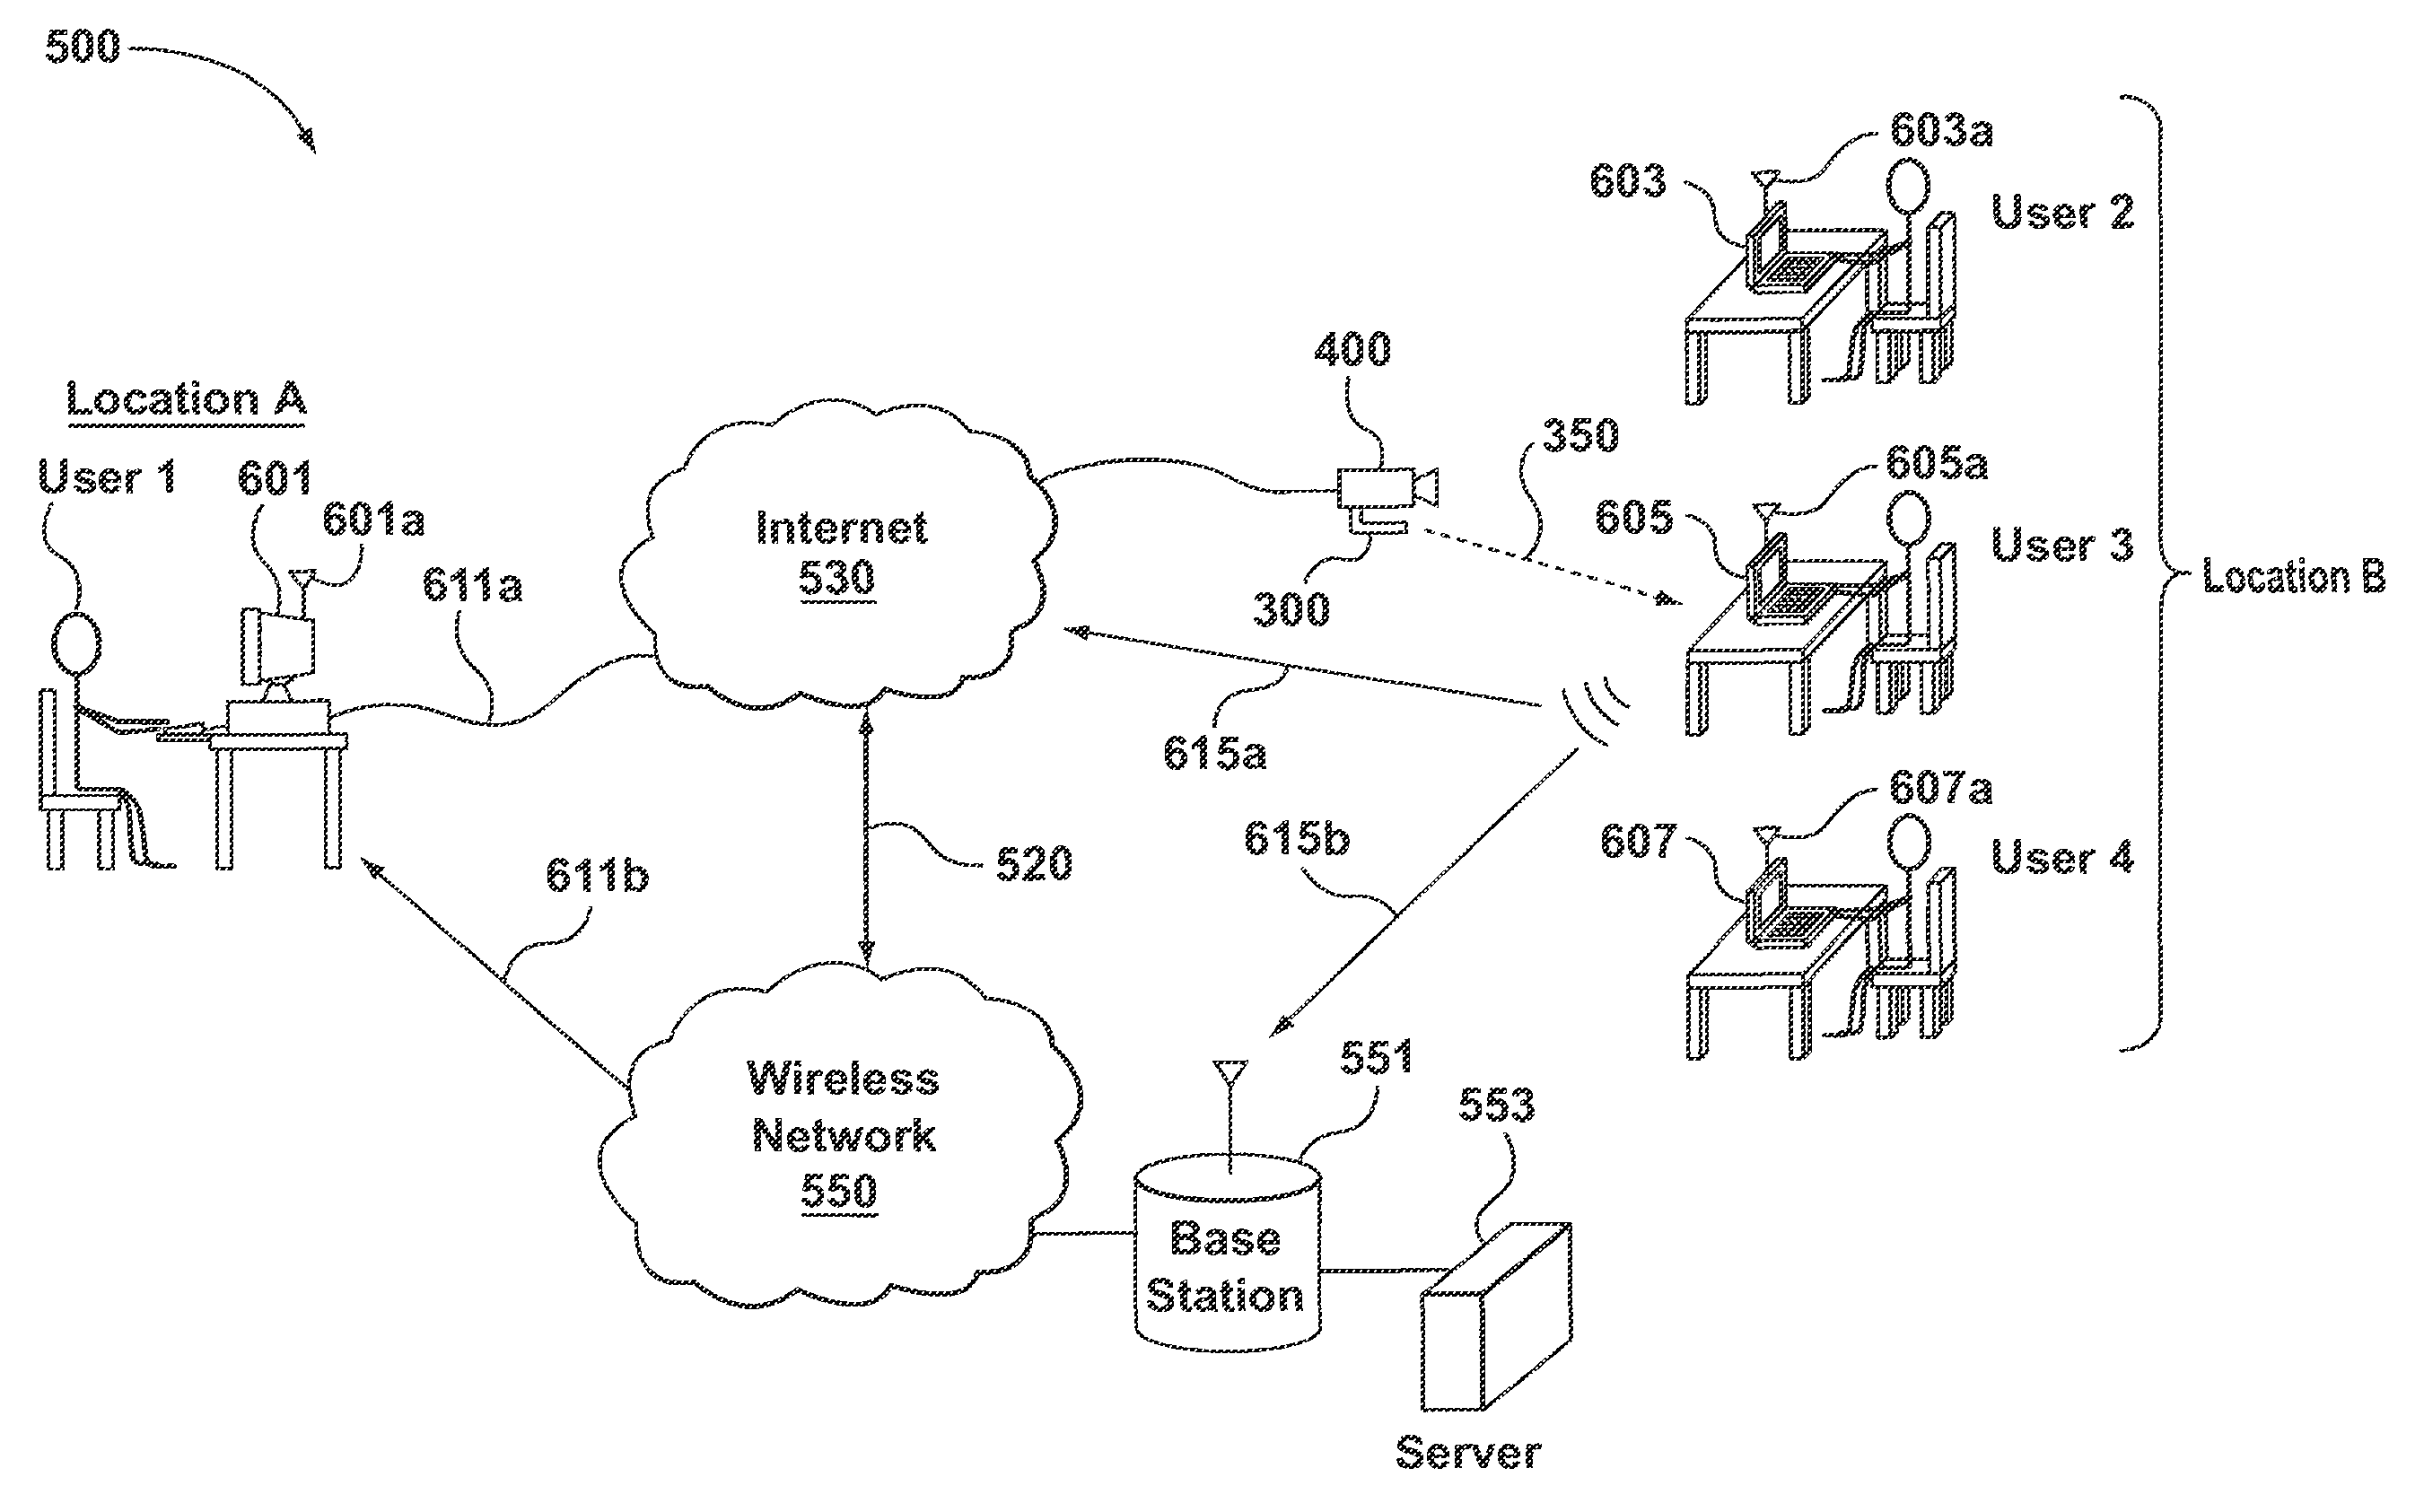 Devices, systems and methods for ad hoc wireless communication